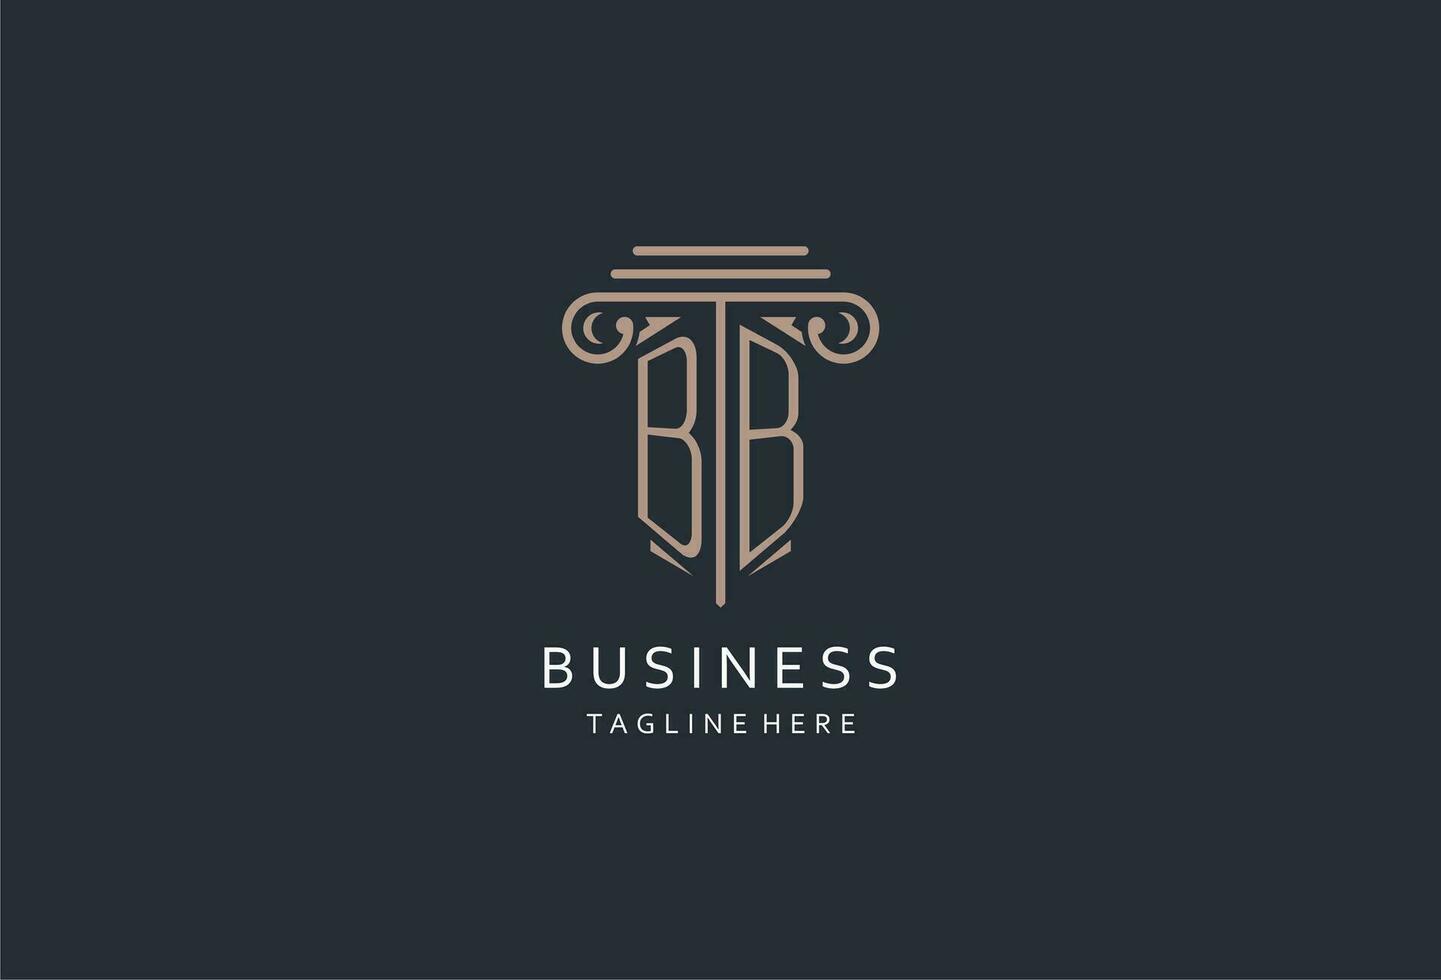 BB monogram logo with pillar shape icon, luxury and elegant design logo for law firm initial style logo vector